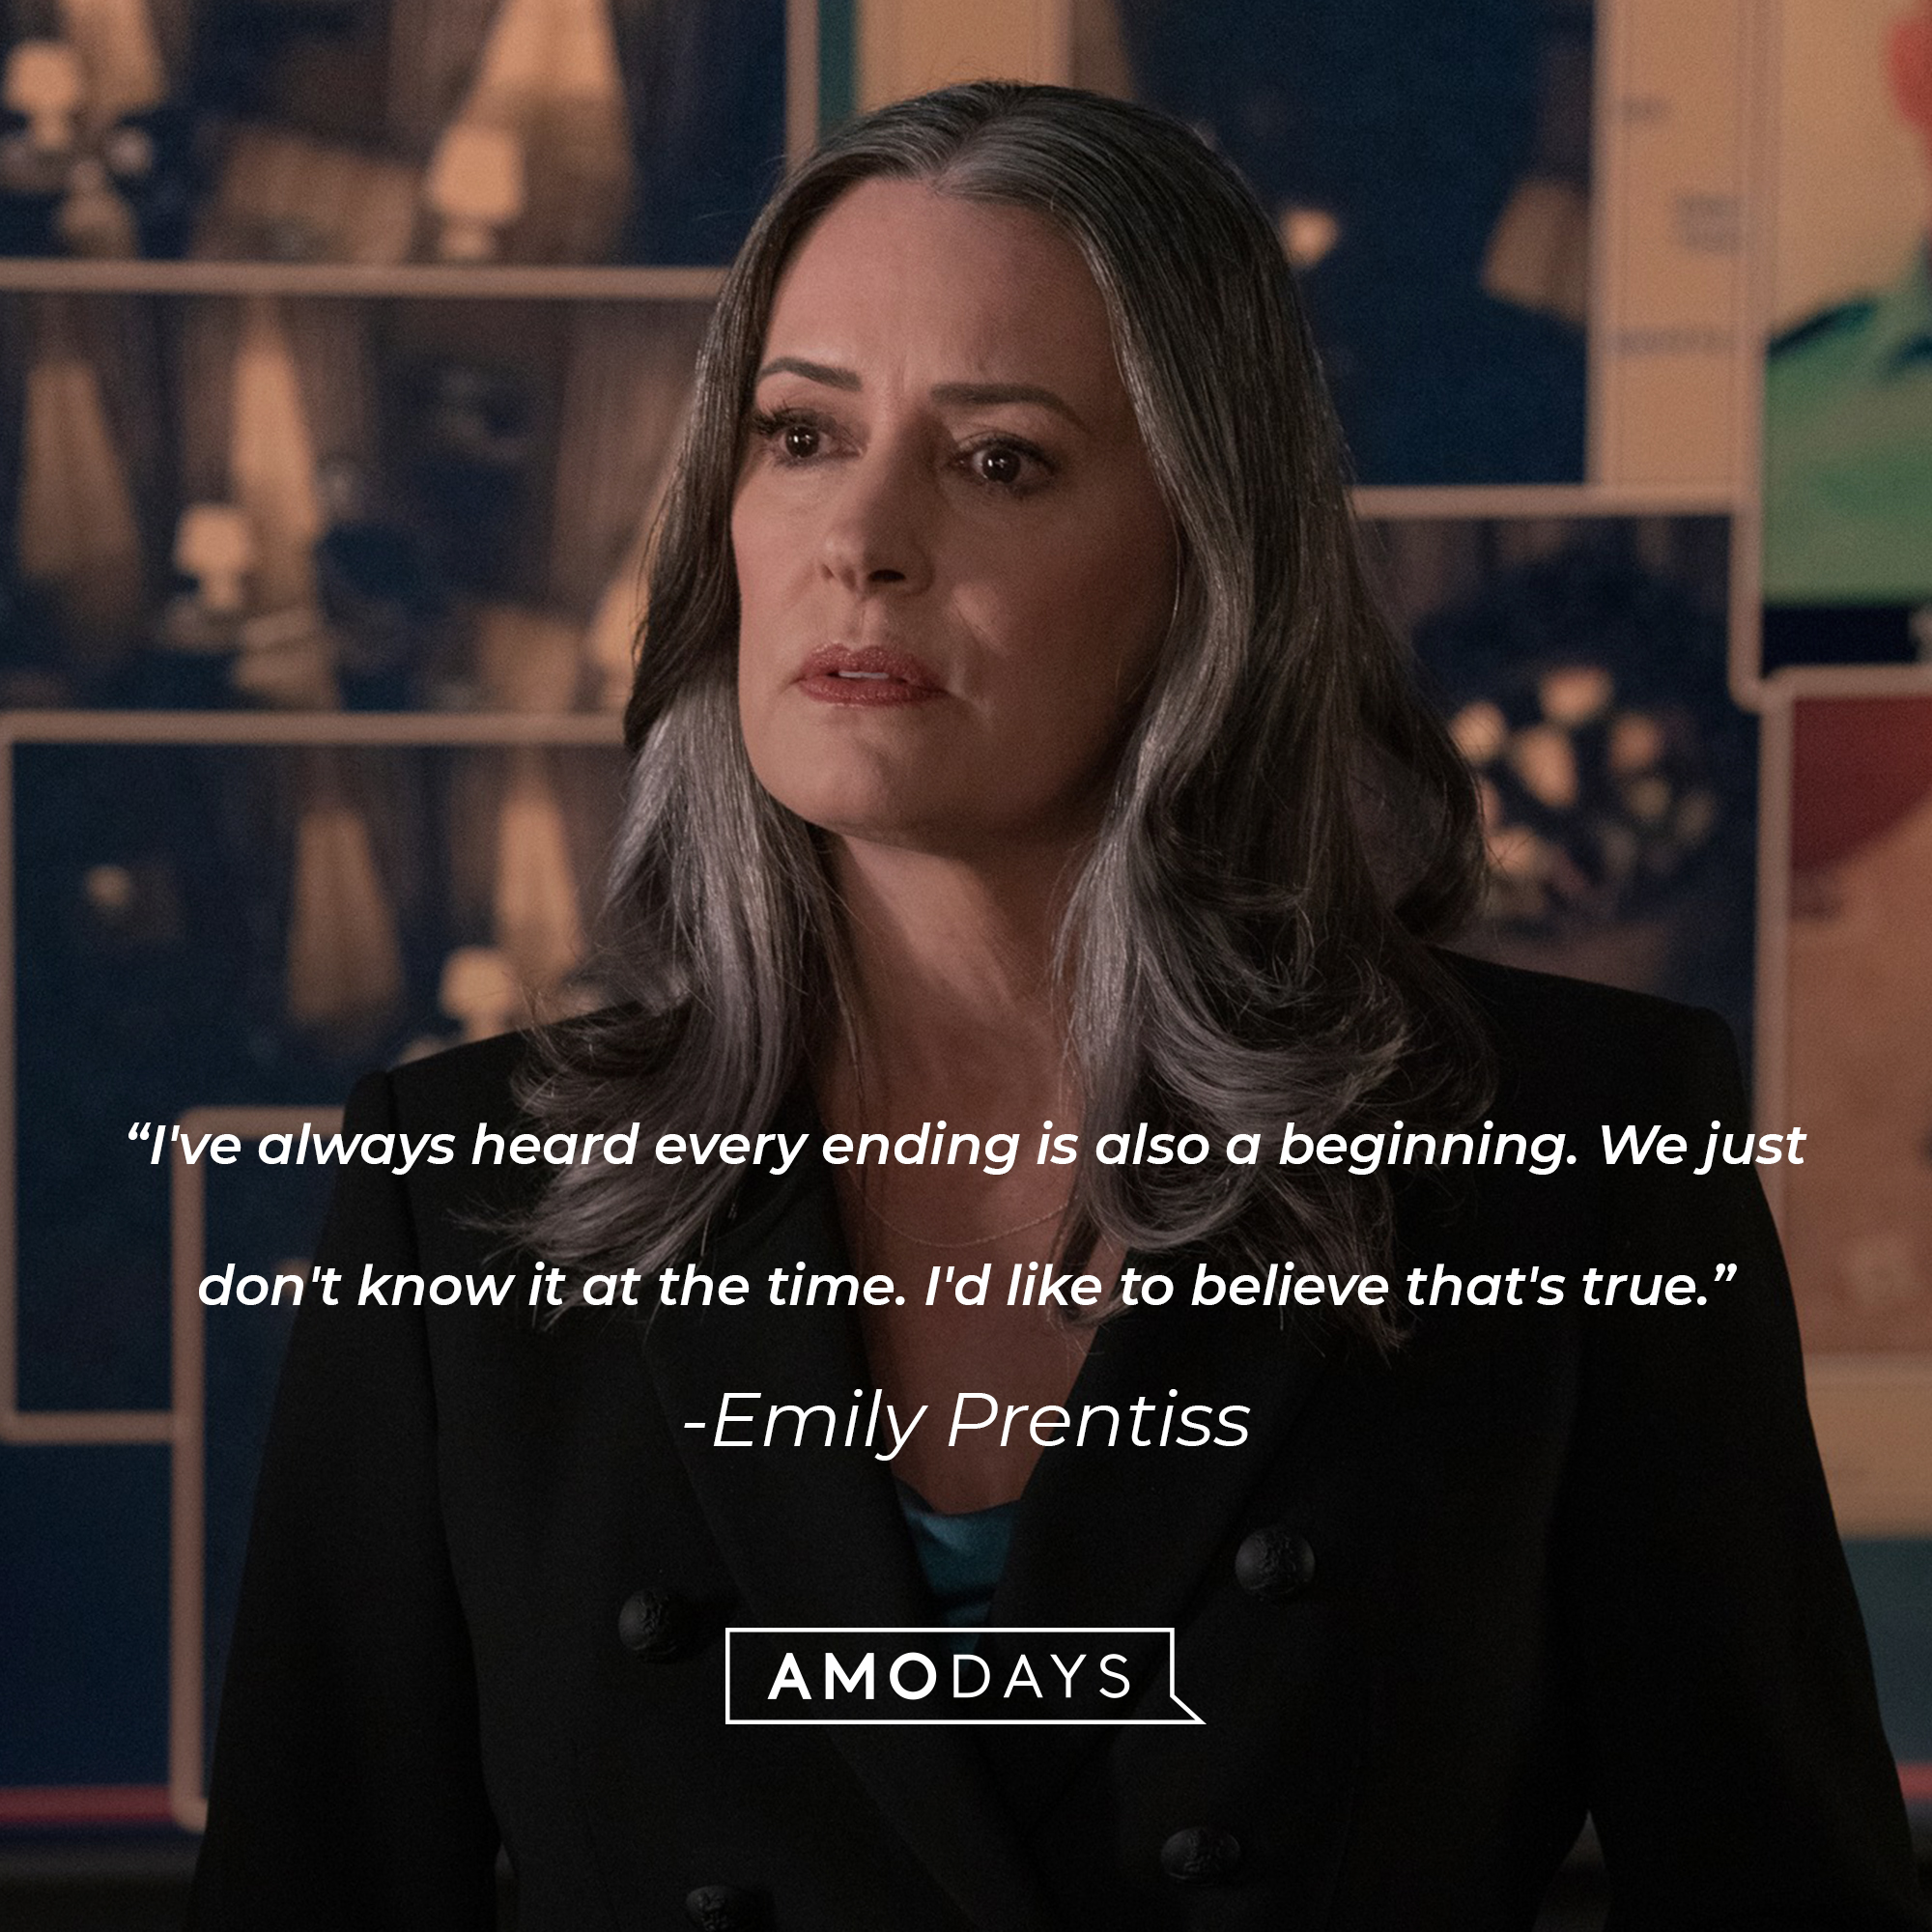 Emily Prentiss' quote: "I've always heard every ending is also a beginning. We just don't know it at the time. I'd like to believe that's true." | Source: Facebook.com/CriminalMinds